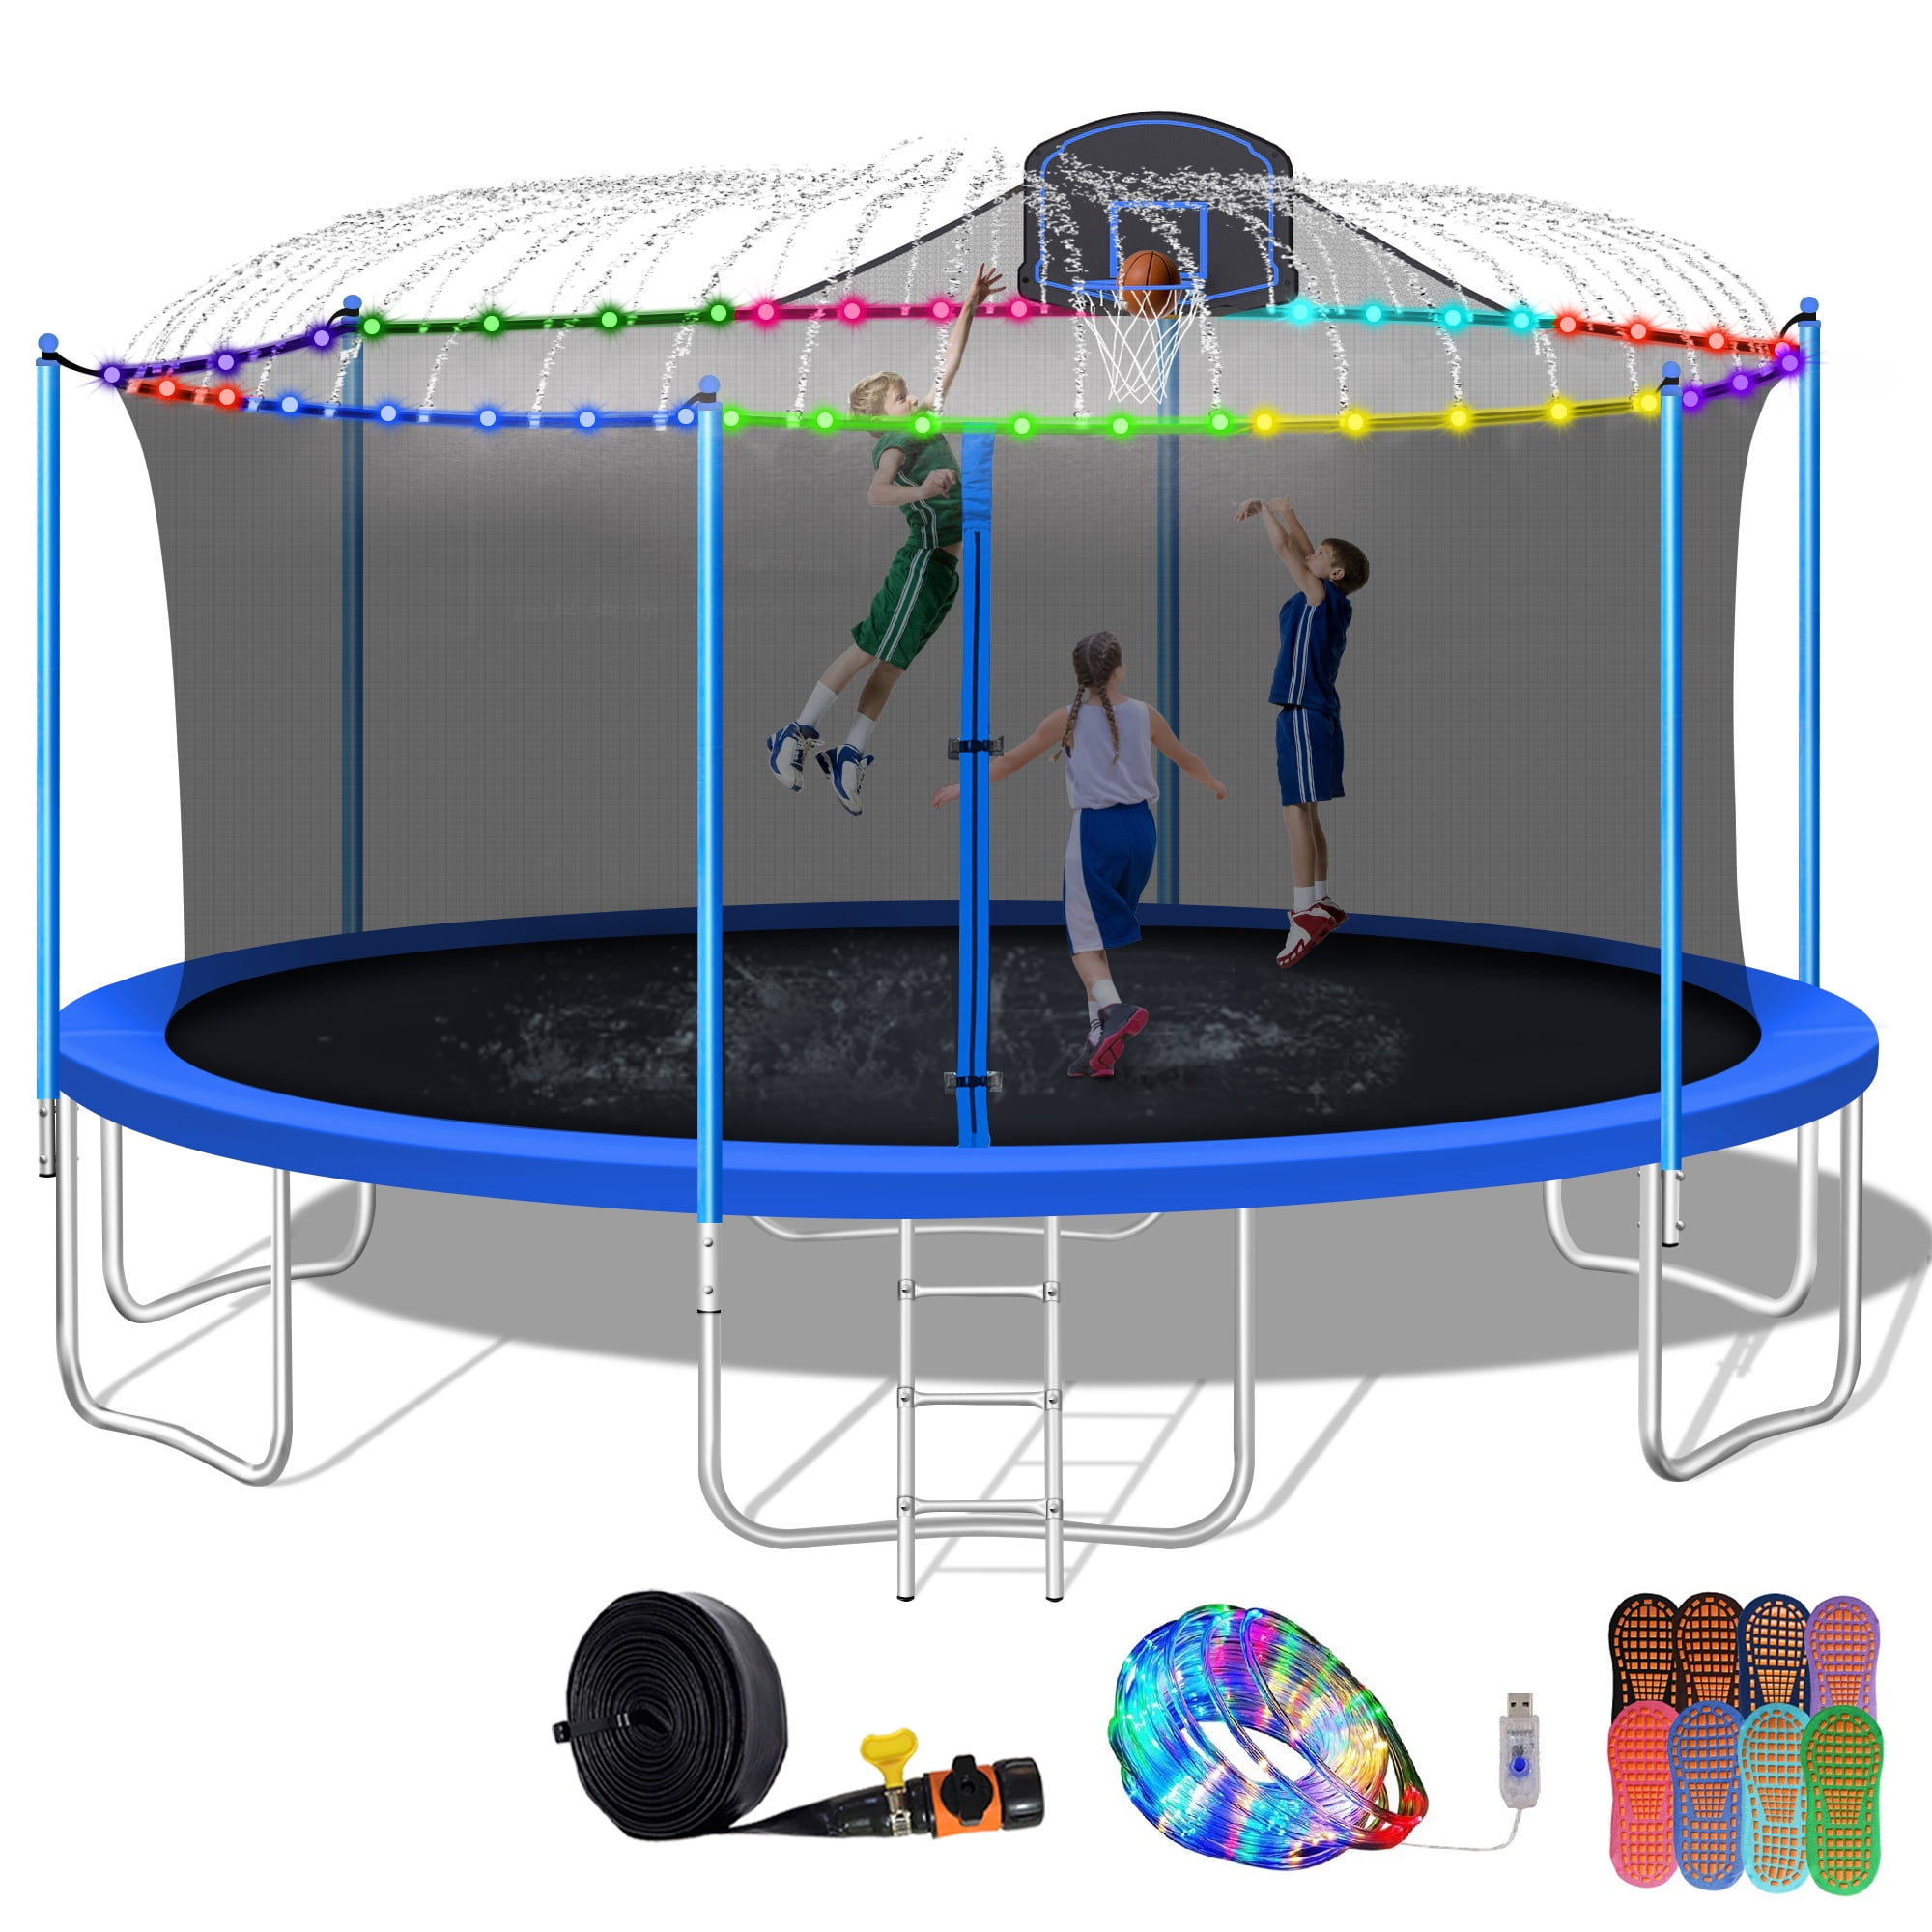 Outdoor Heavy Duty Recreational Tranpolines for Backyard Family Play Outdoor Round Tranpoline with Enclosure YORIN 1000LBS 12 14 15FT Tranpoline for Kids & Adults Basketball Hoop and Ladder 